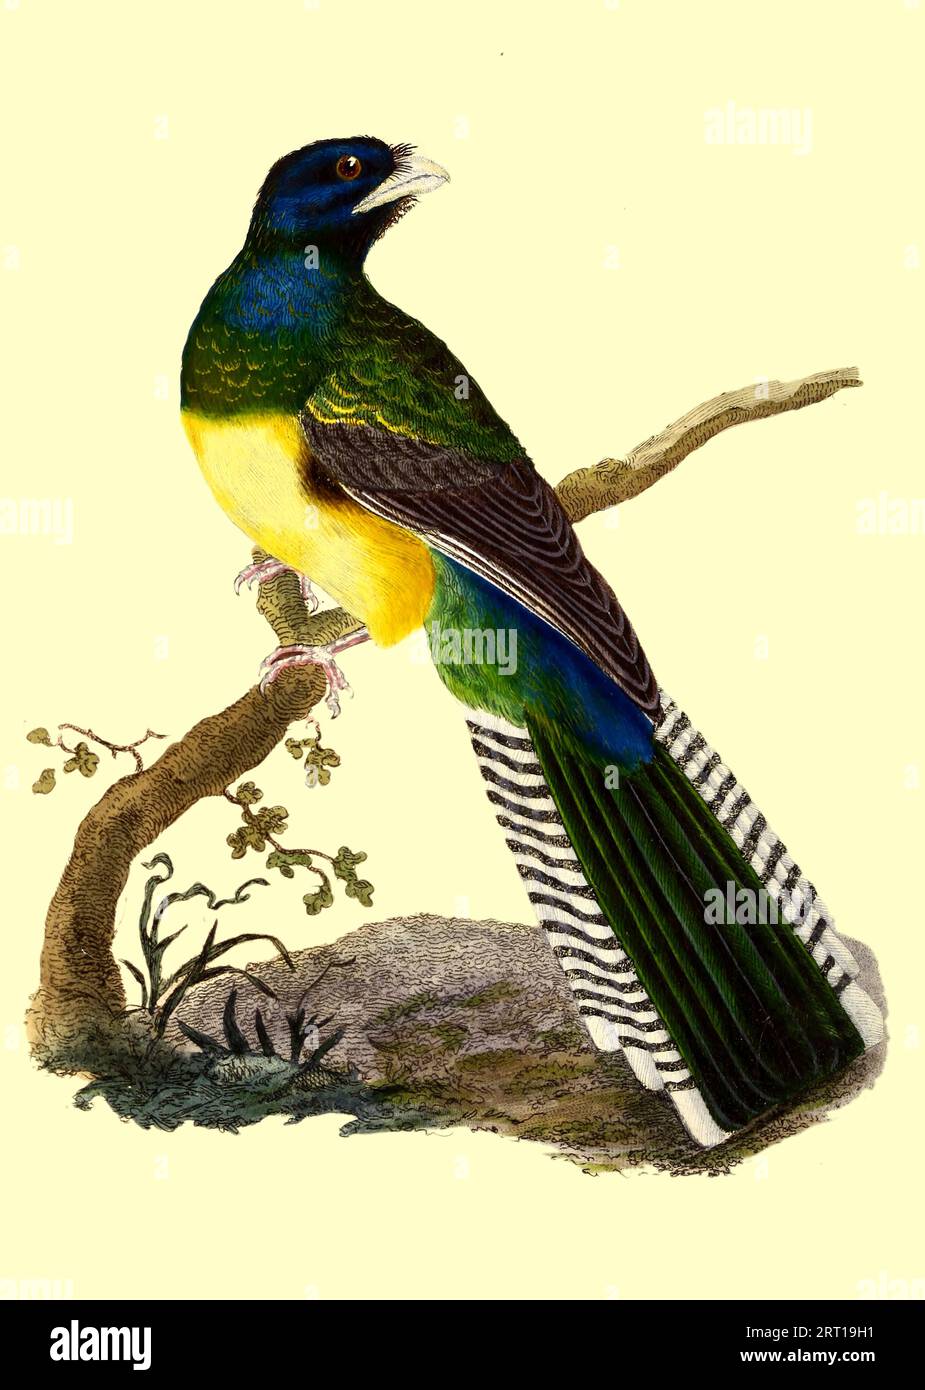 The black-throated trogon, also known as yellow-bellied trogon, (Trogon rufus) [here listed as Viridis, Trogon, Yellow-Bellied Green Trogon or Curucui is a near passerine bird in the trogon family, Trogonidae. Although it is also called "yellow-bellied trogon" it is not the only trogon with a yellow belly. It breeds in lowlands from Honduras south to western Ecuador and northern Argentina. Coloured Plate from ' The Naturalist's repository, or, Monthly miscellany of exotic natural history by Donovan, E. (Edward), 1768-1837 Volume 1 1823 Consisting of elegantly coloured plates with appropriate s Stock Photo